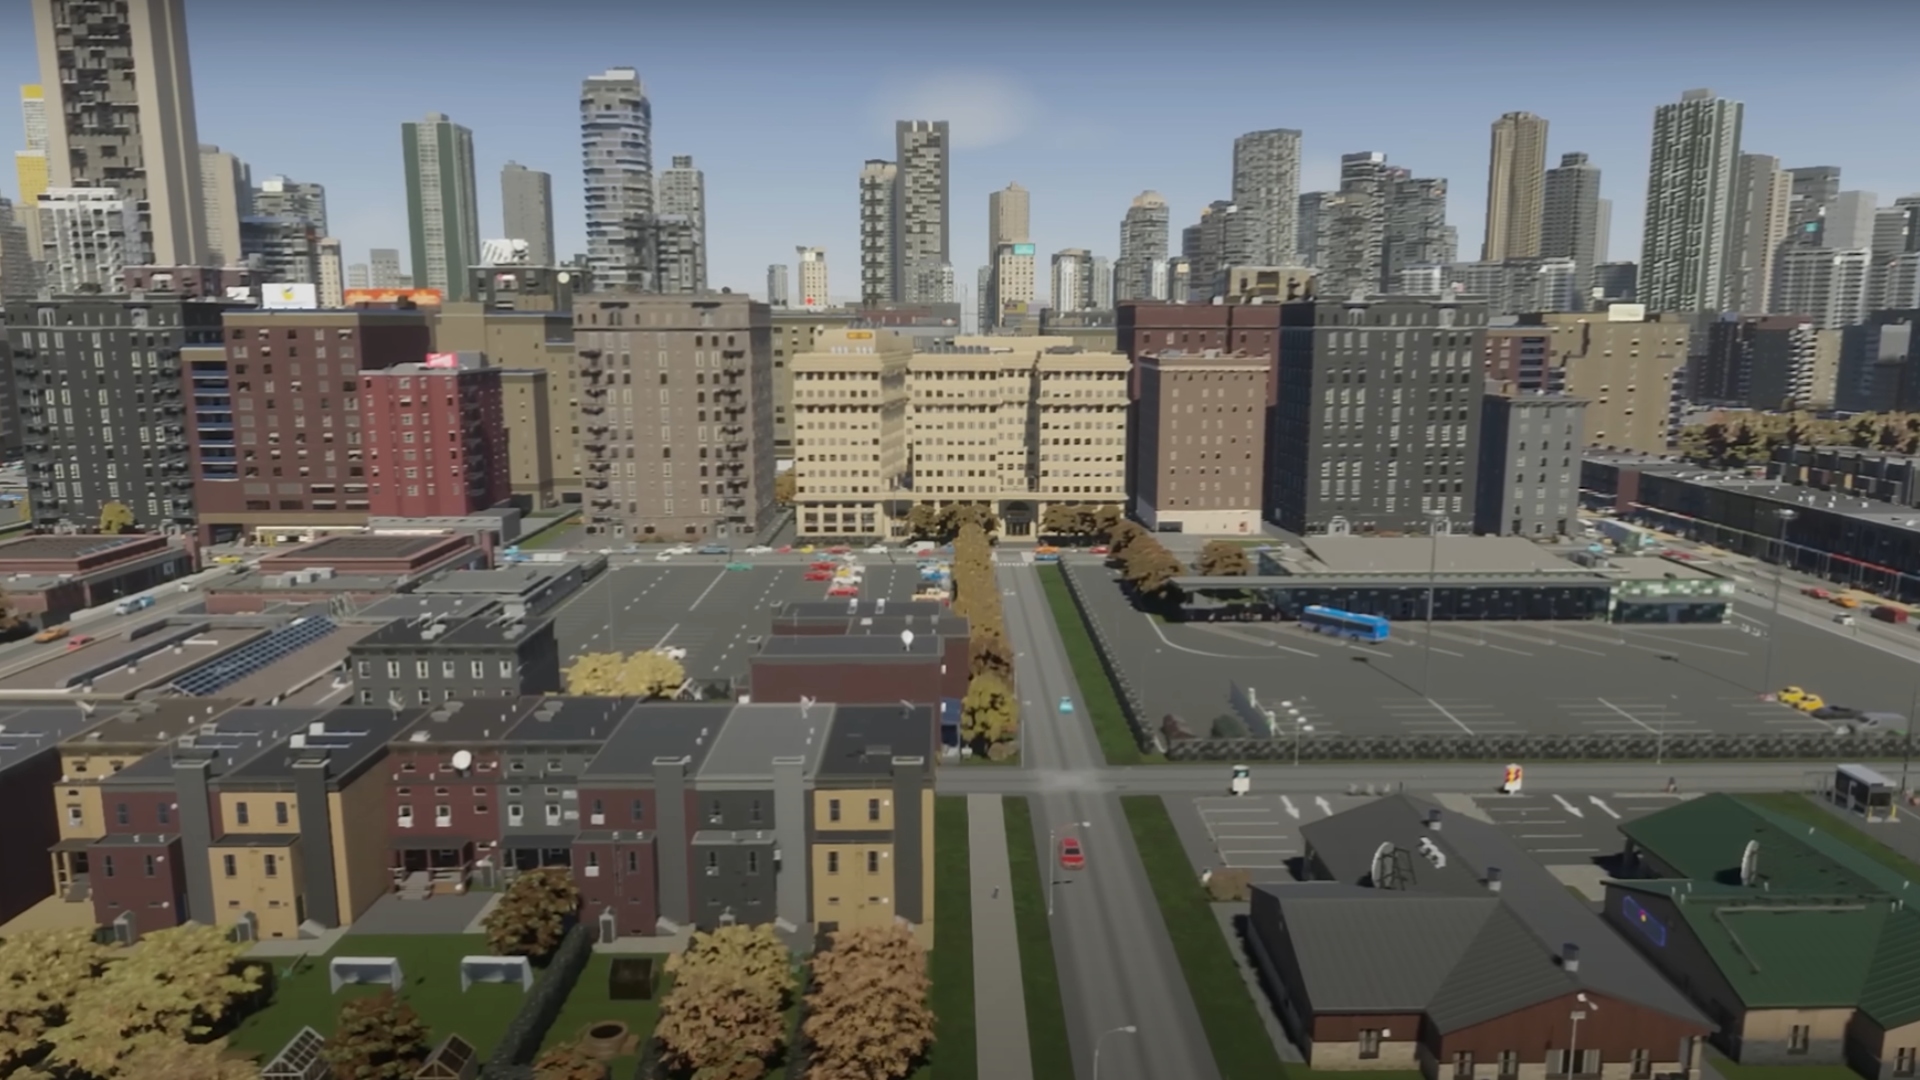 Cities Skylines 2 economy patch: A small downtown area from Colossal Order city building game Cities Skylines 2